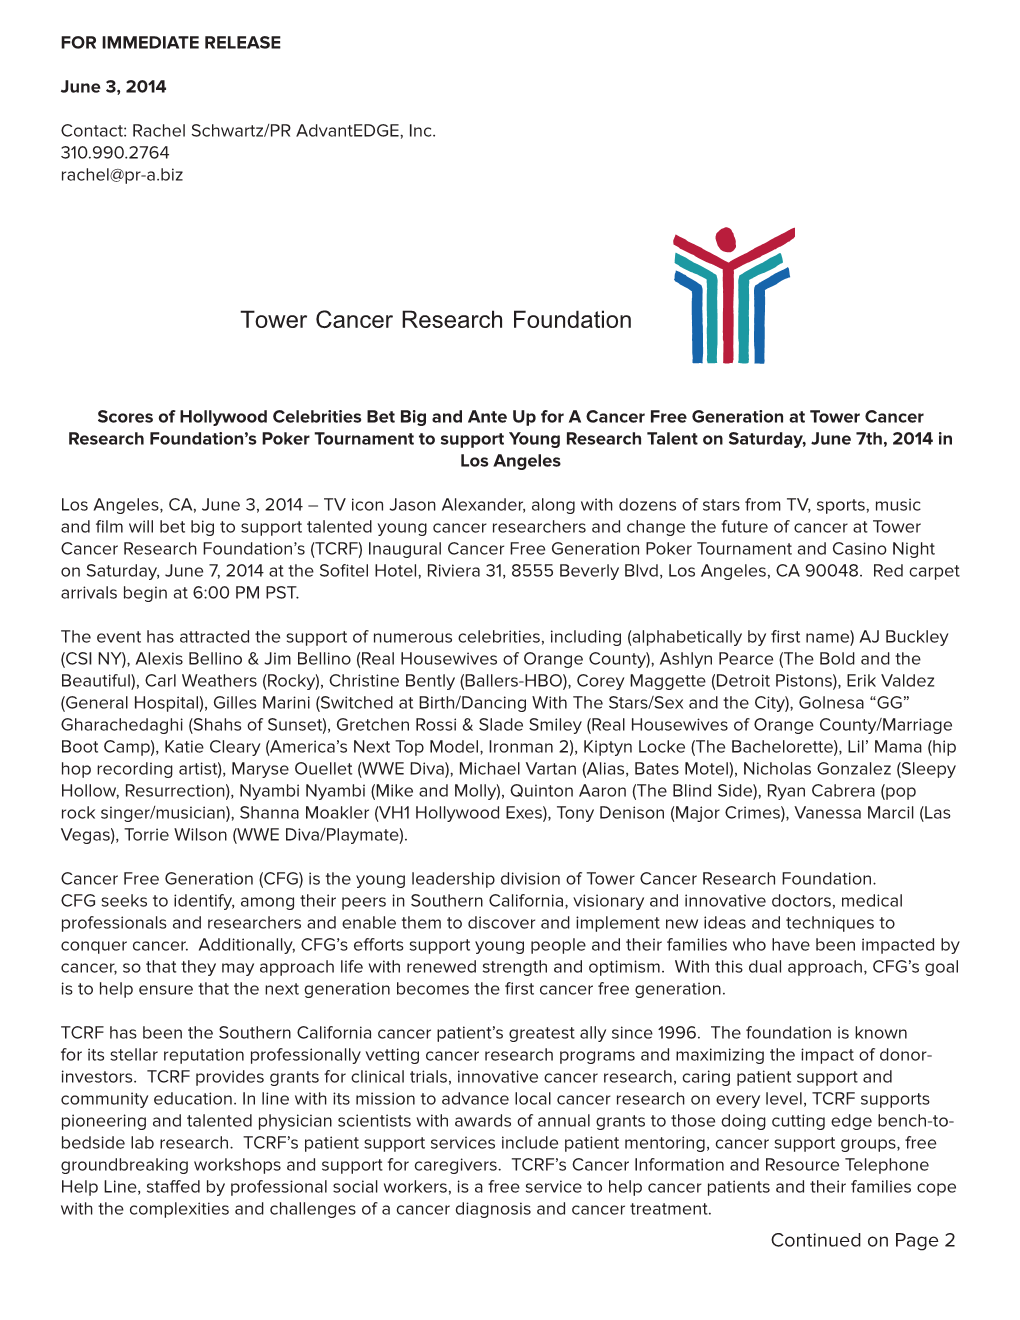 TCRF Pre Event Press Release